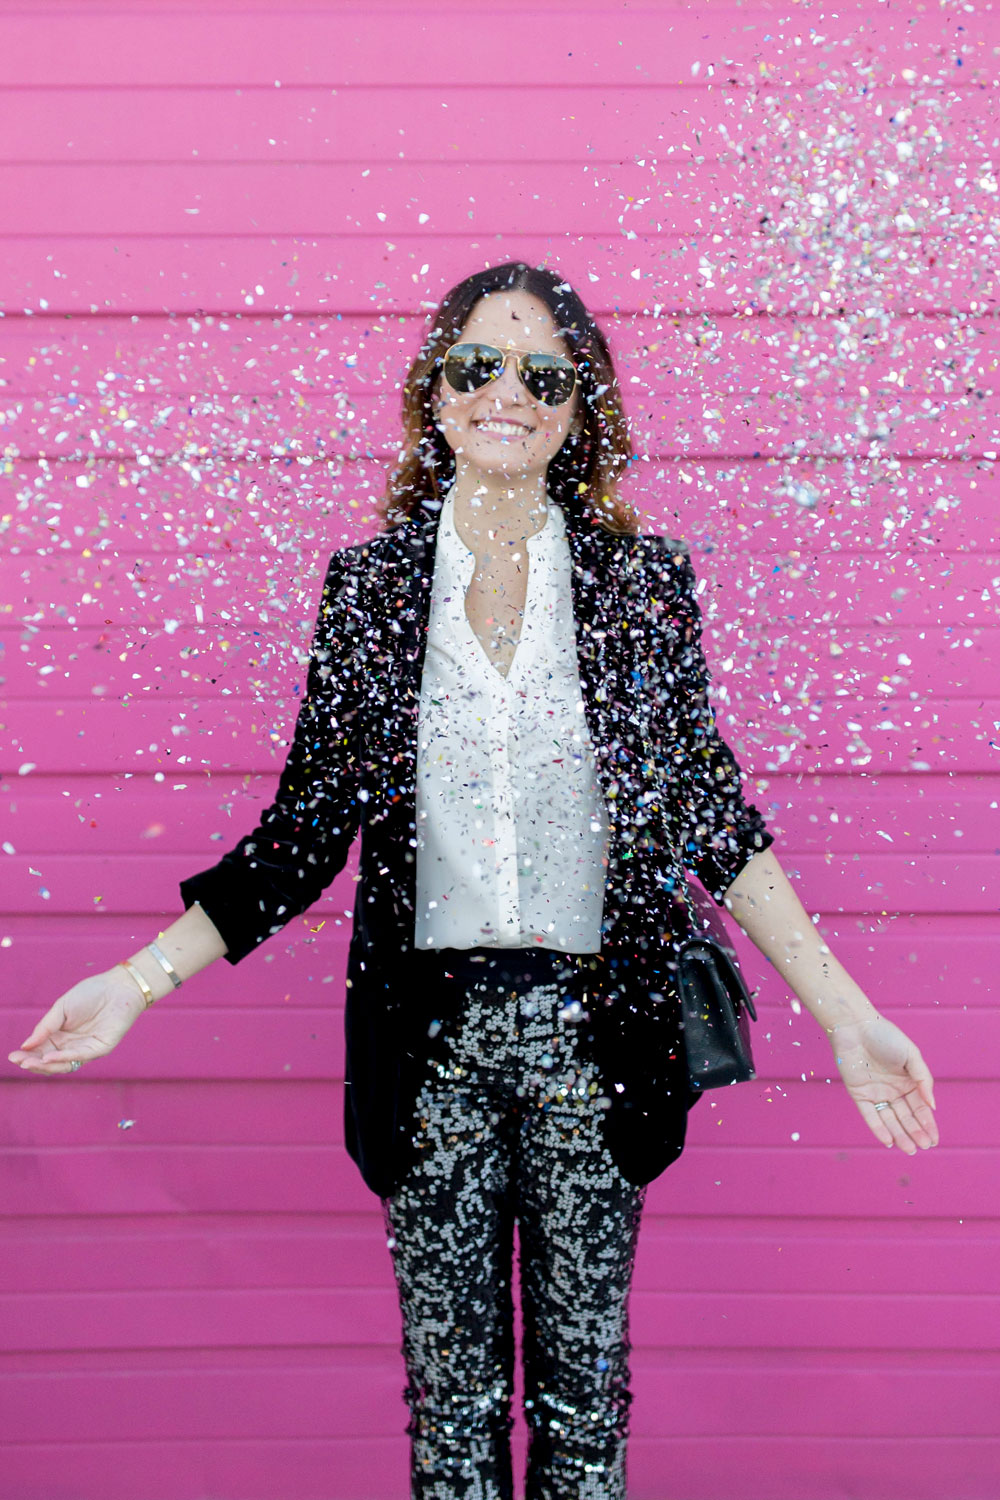 Jennifer Lake Style Charade throwing confetti in Express sequin leggings, black velvet blazer, ivory lace top, and a quilted Chanel flap bag in front of a Chicago pink wall